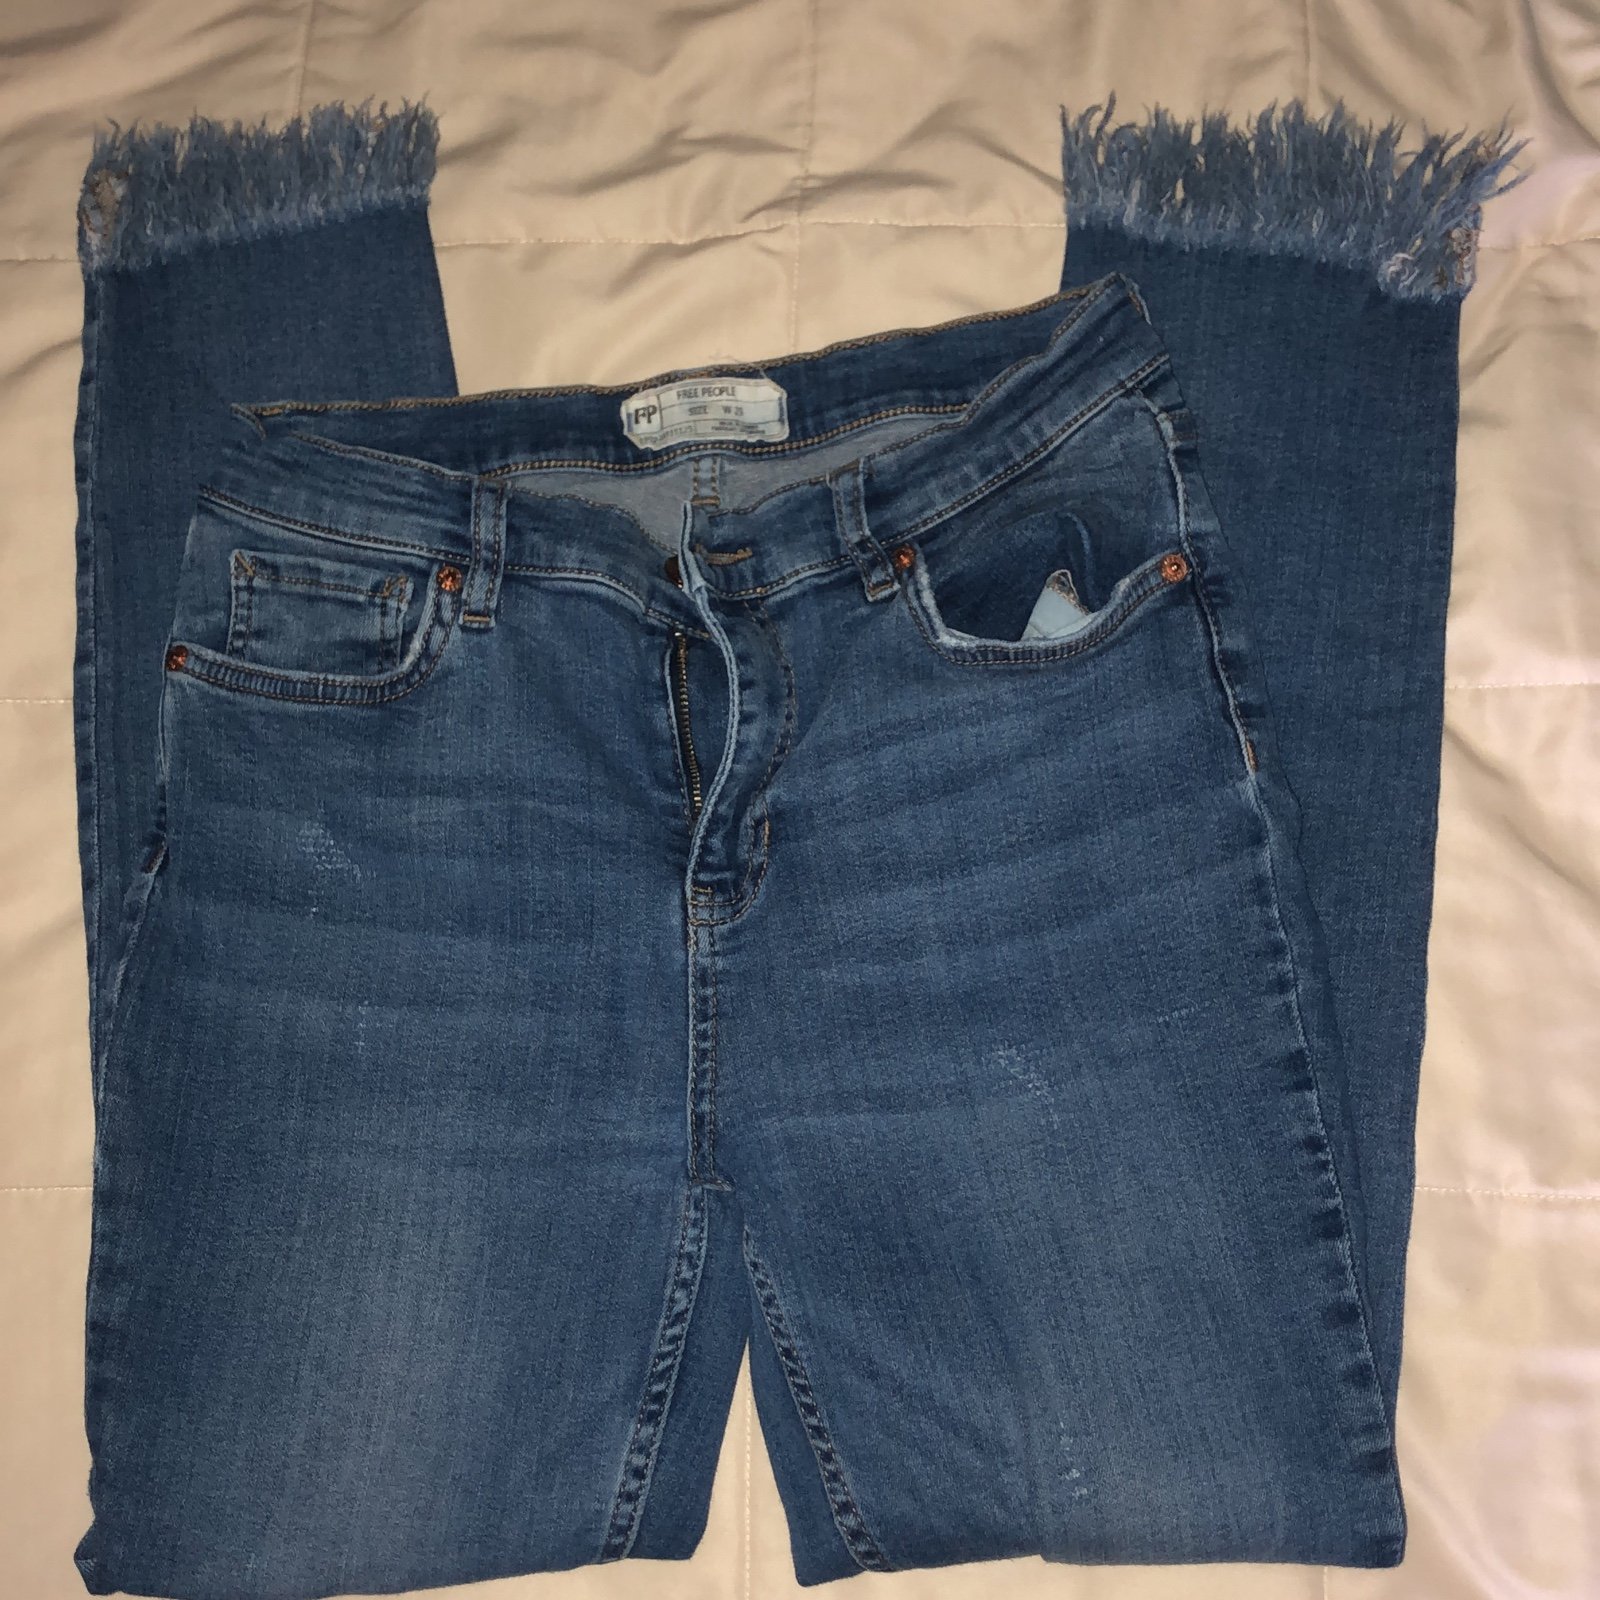 Affordable Free People jeans oQHq21tN7 Outlet Store